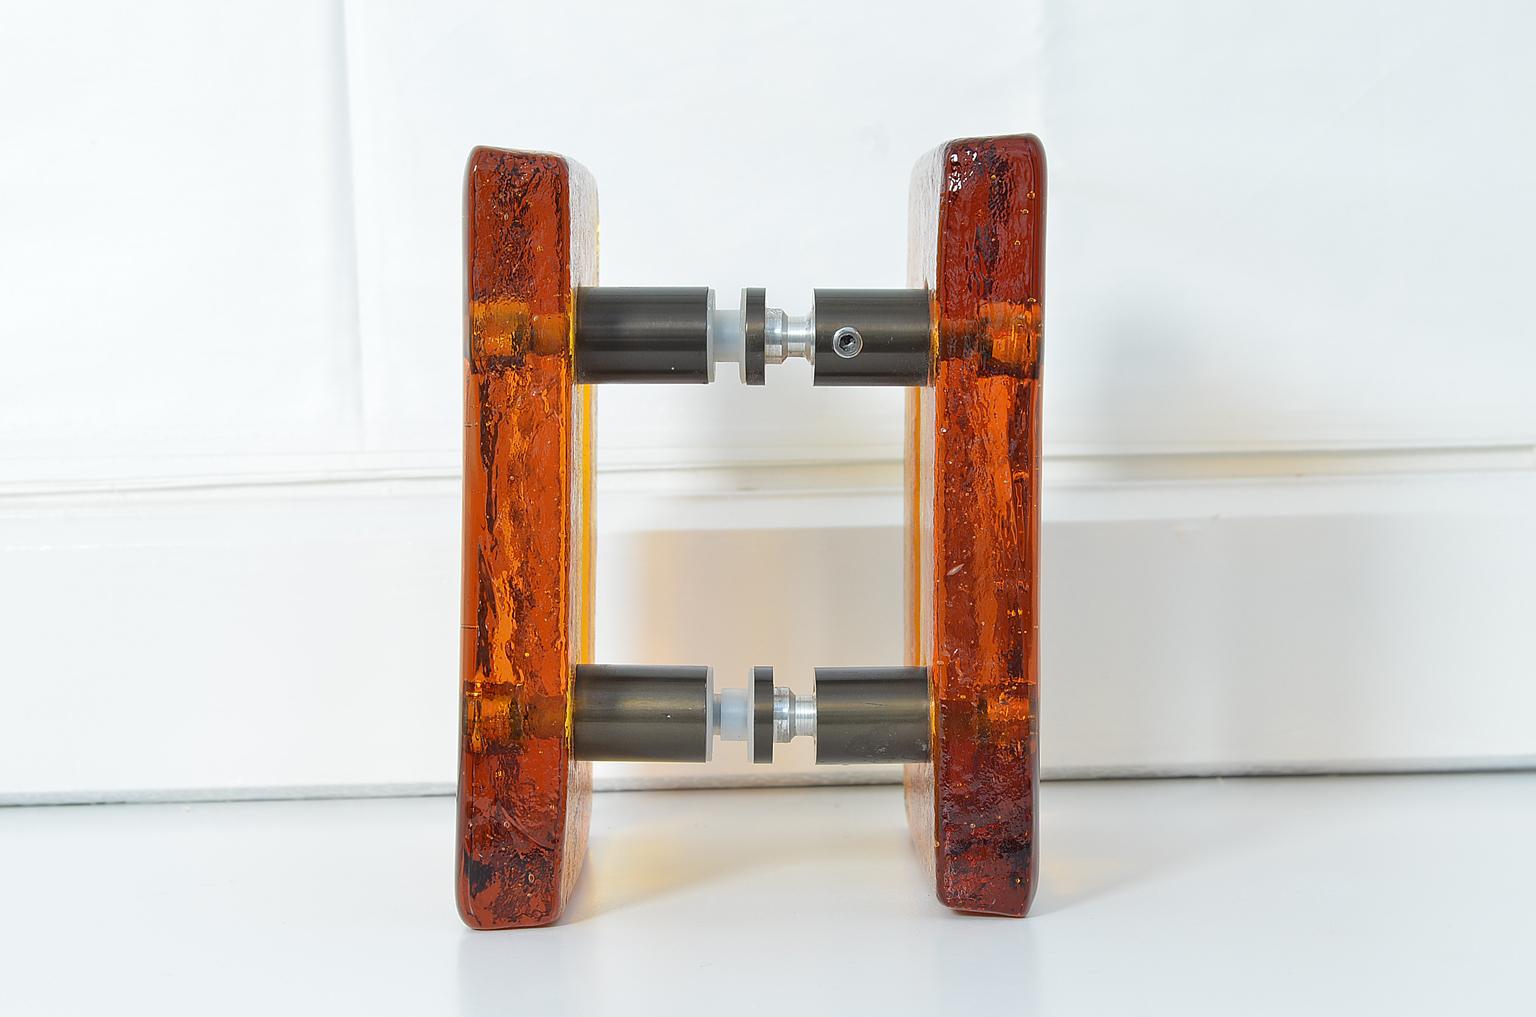 French Push and Pull Door Handle in Orange Glass with Brass Fittings, France, 1970s For Sale